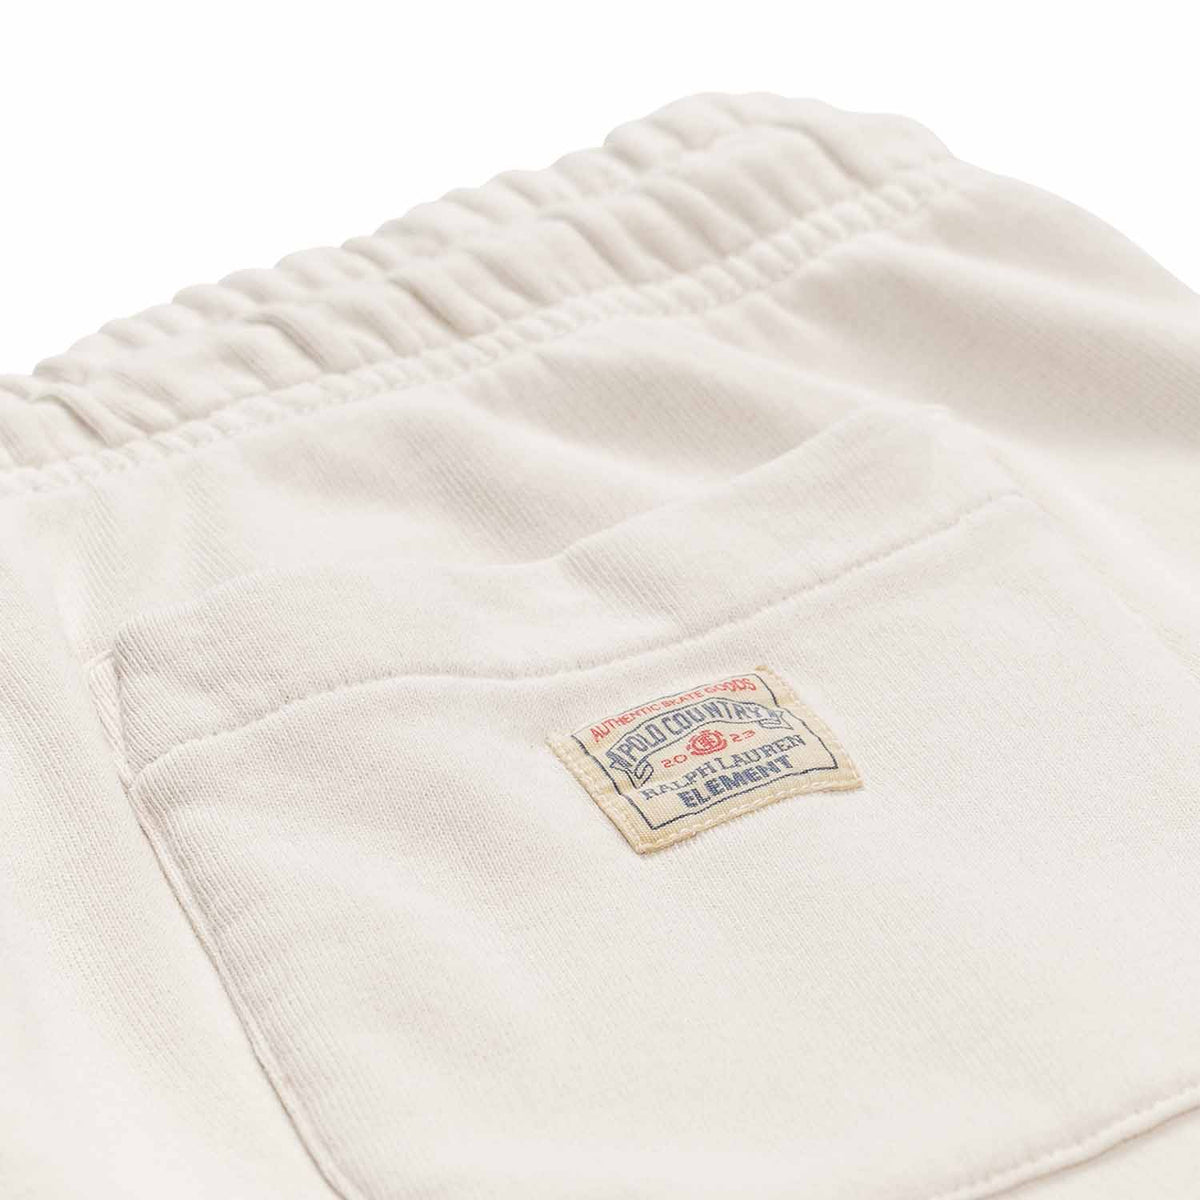 Polo Ralph Lauren x Element Sweatpants in cream with draw string and elastic in ankles. With back pocket on right side and small patch Polo Ralph Lauren x Element logo on pocket. Close up photo of patch with red and blue Polo Ralph Lauren x Element Logo.